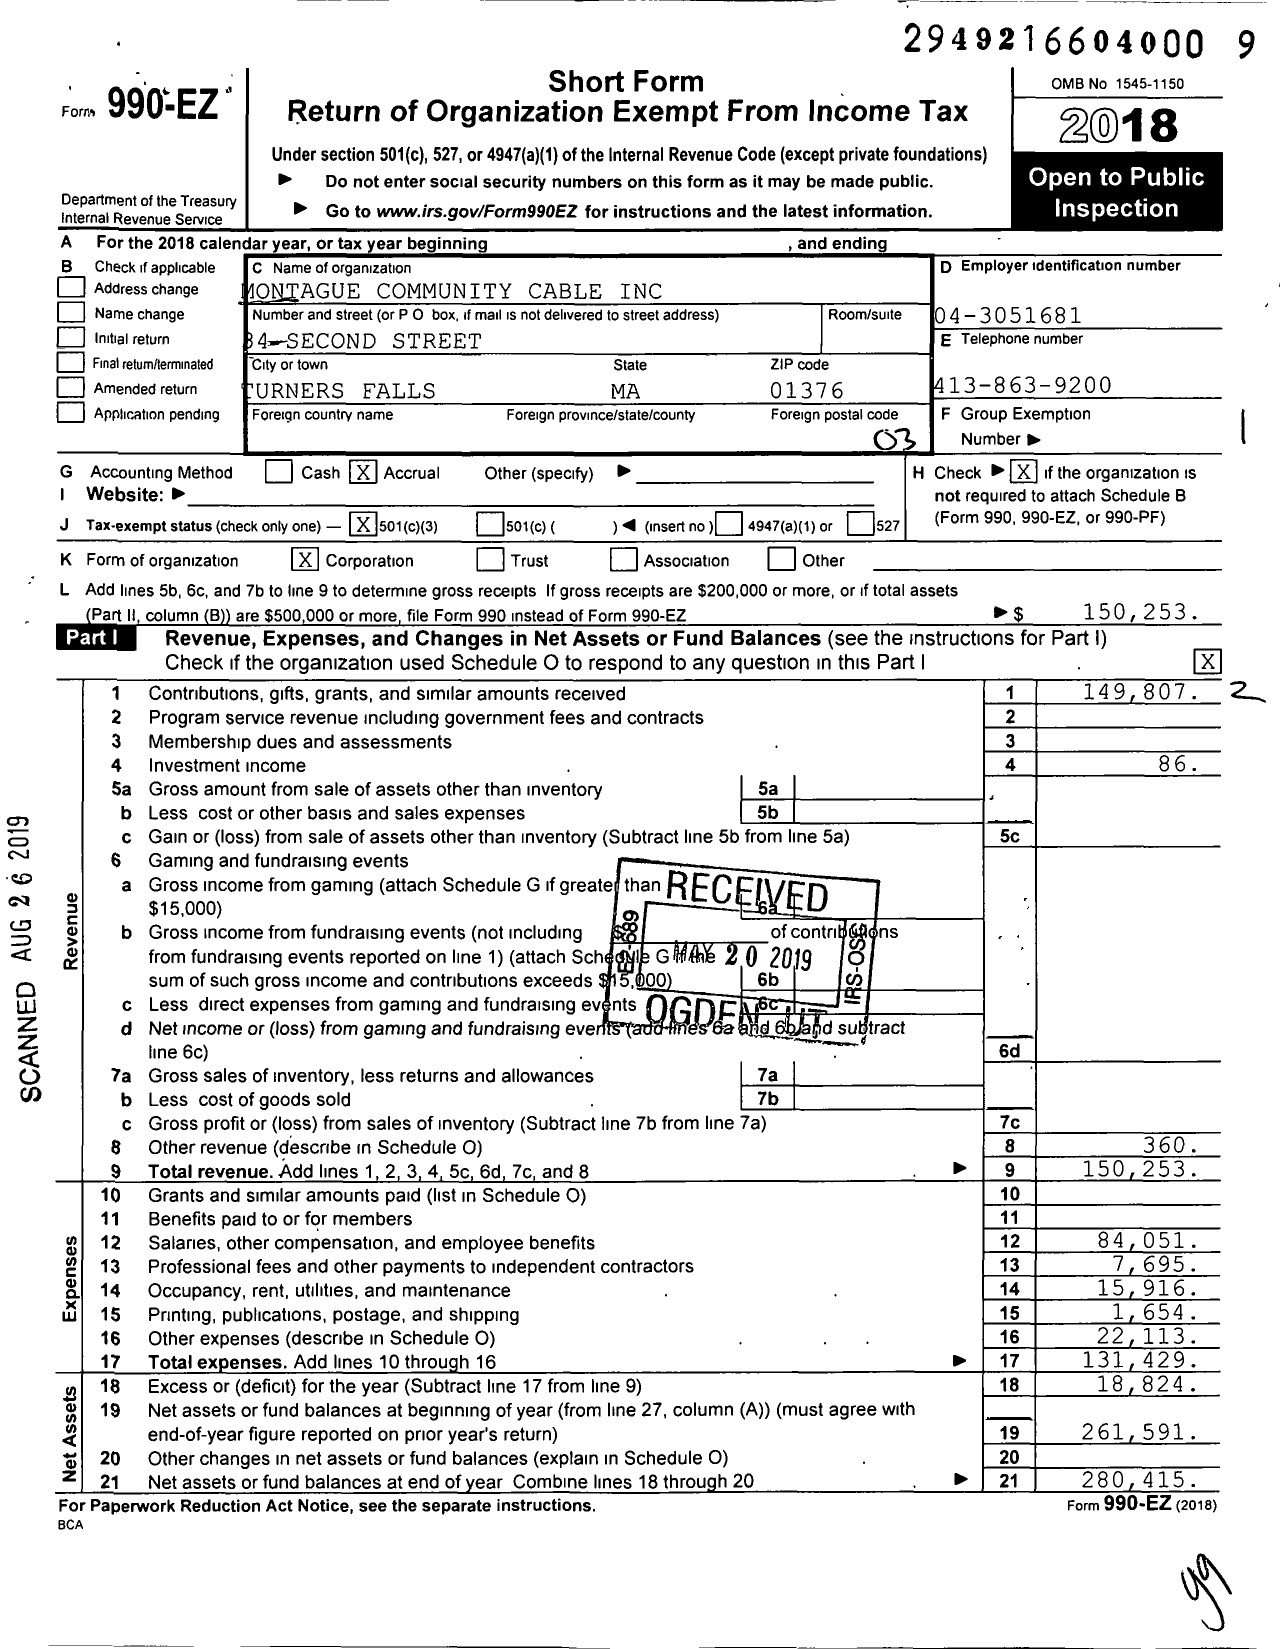 Image of first page of 2018 Form 990EZ for Montague Community Cable